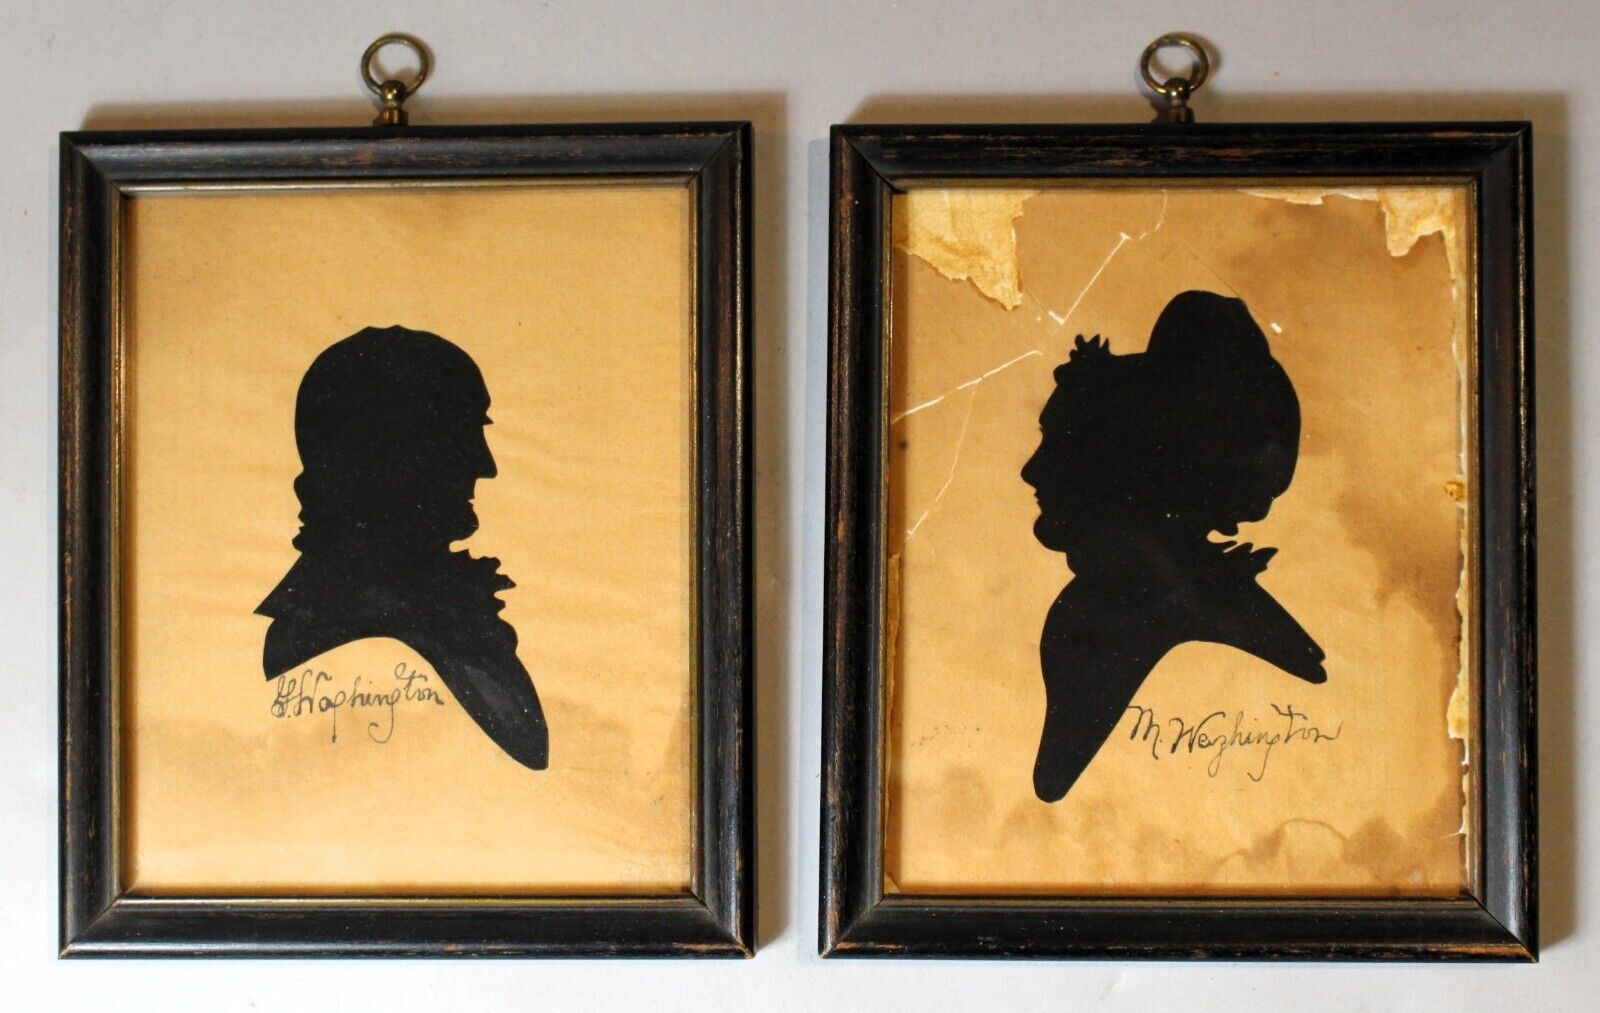 Pair of Framed Hand Cut Silouettes of George and Martha Washington c. 1895-1910